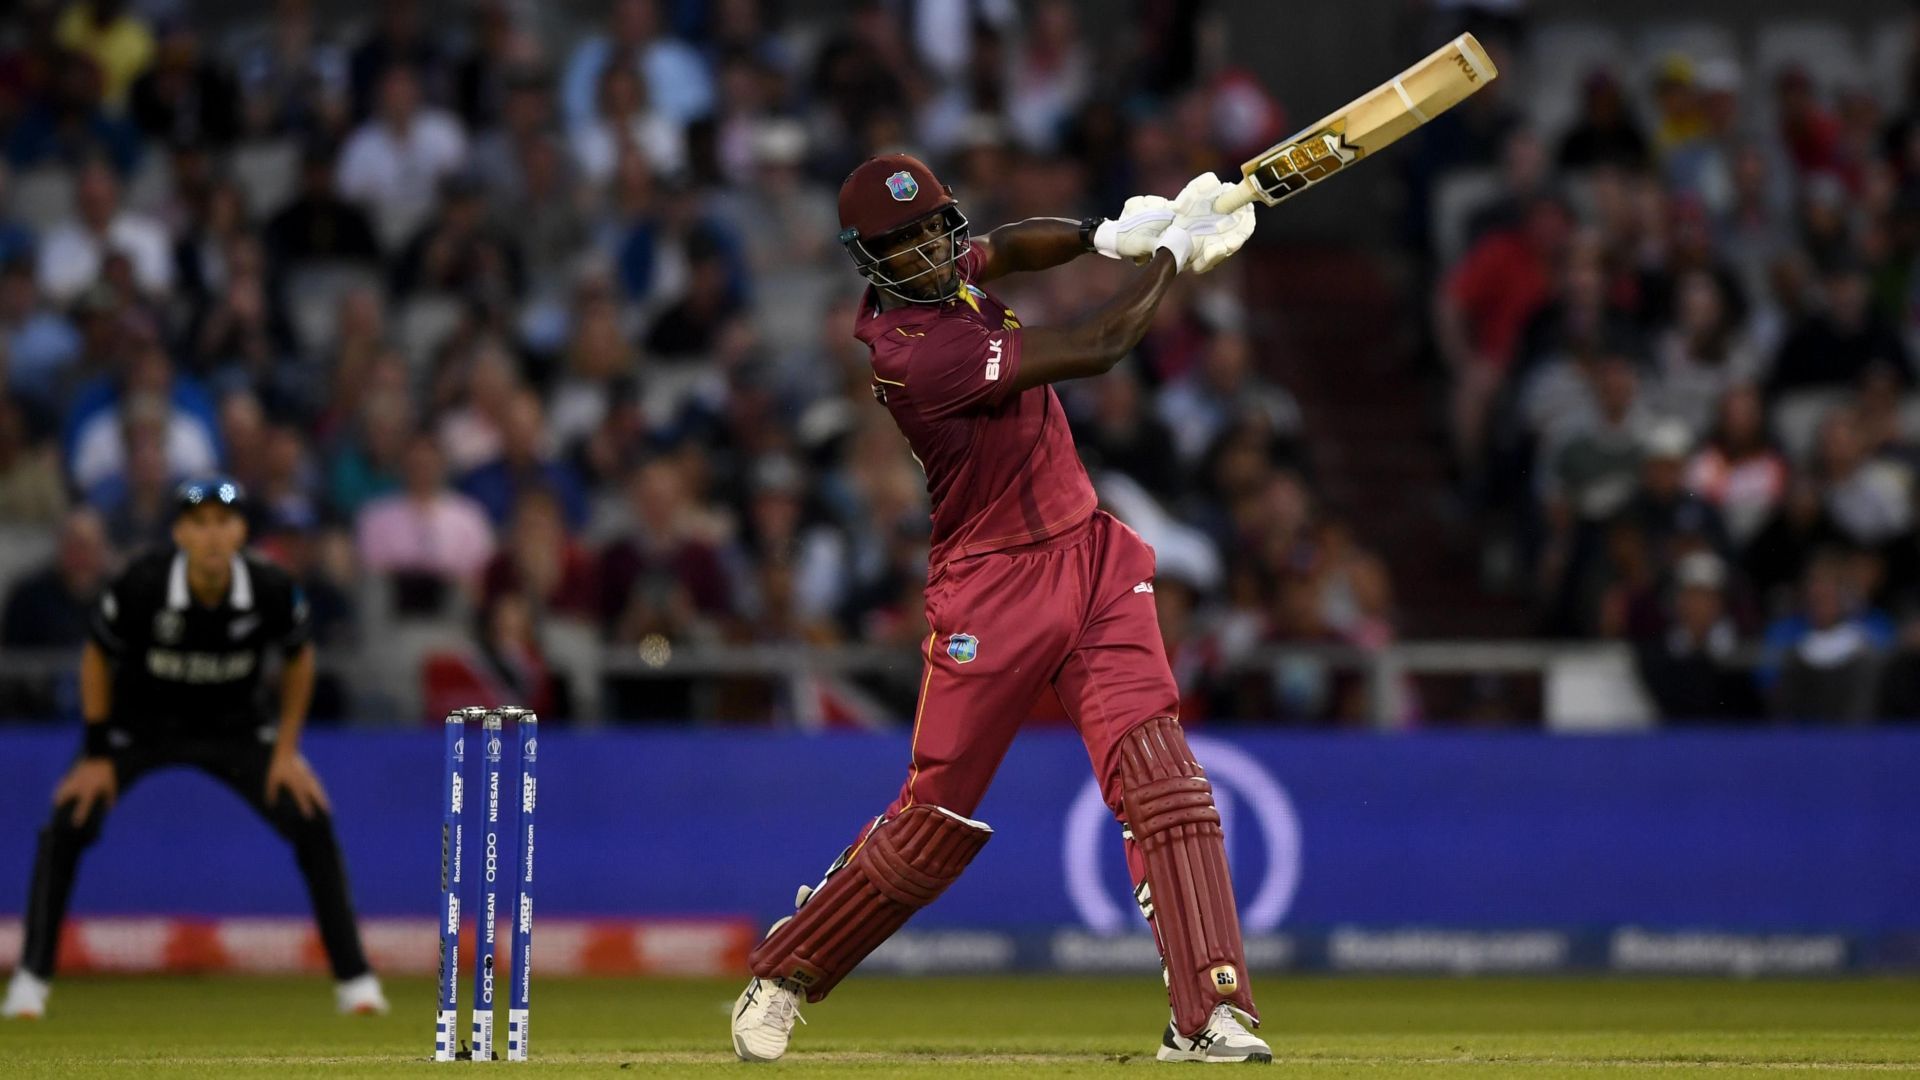 Despite having the talent, Carlos Brathwaite never could leave a mark in the IPL